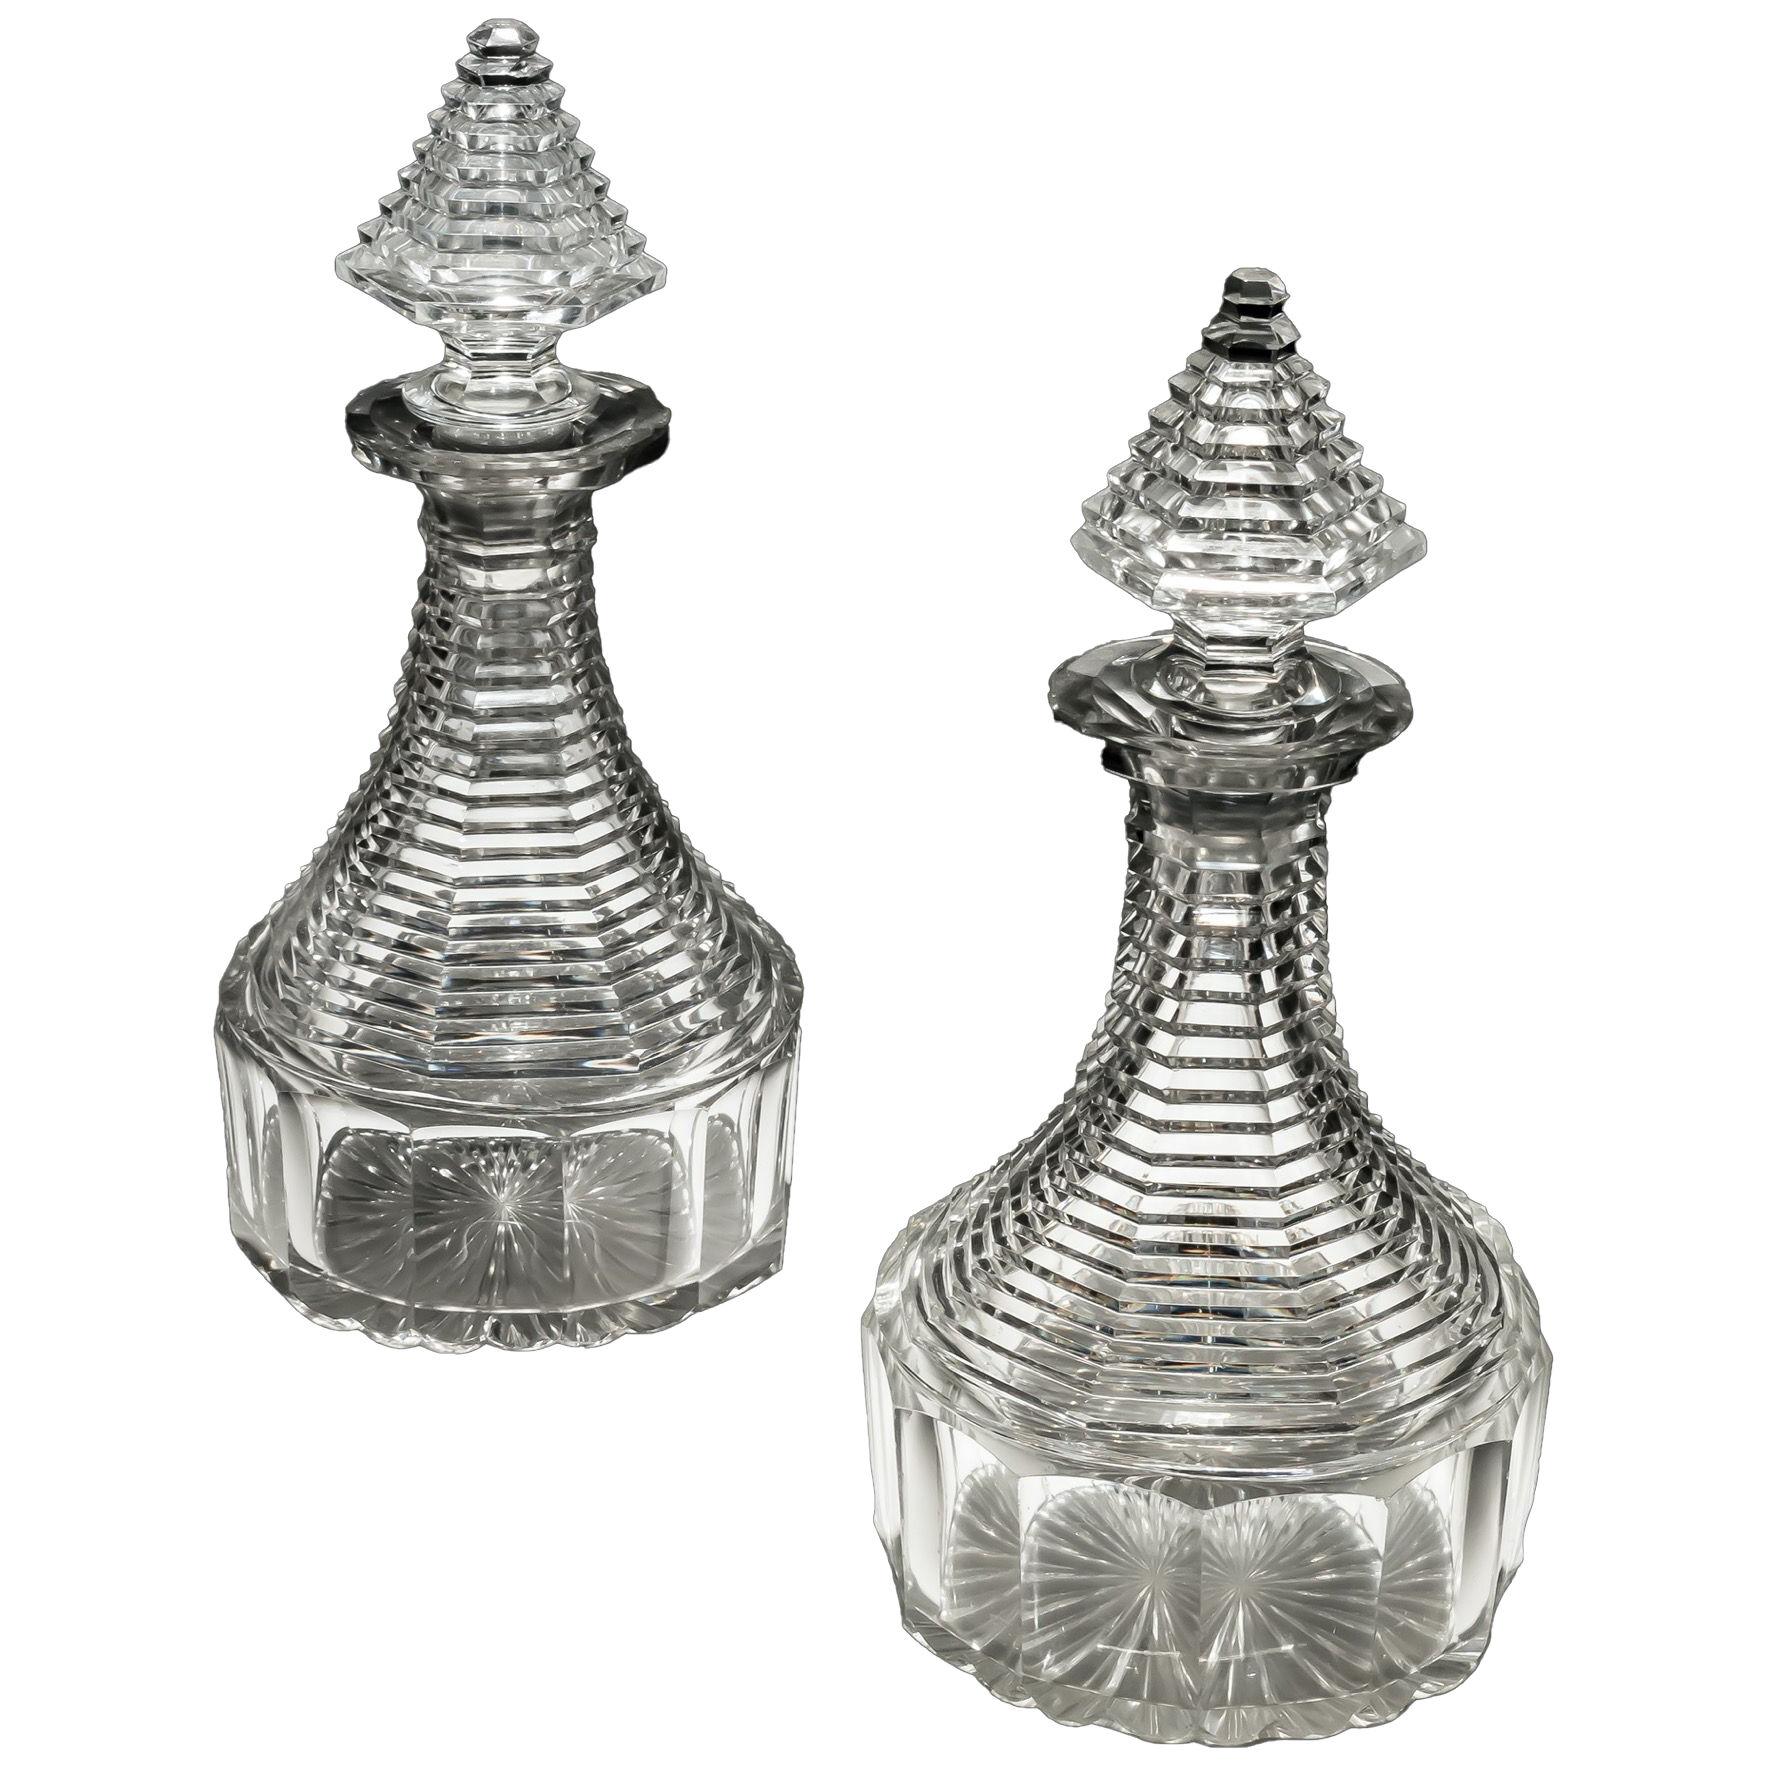 A Fine Pair of Regency Step Cut Semi Ships Decanters